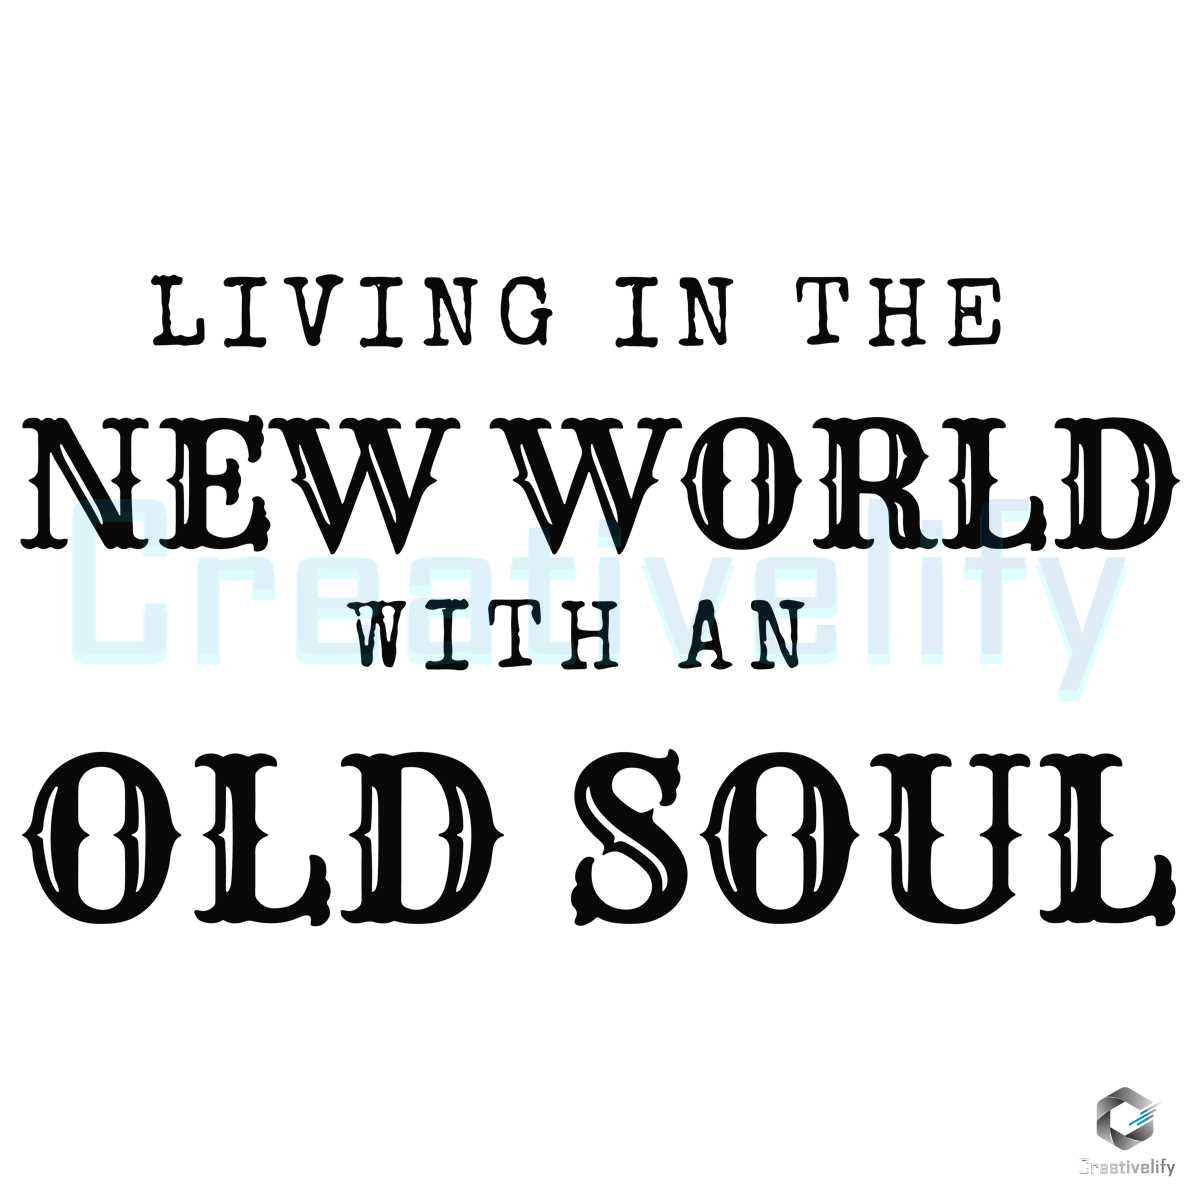 Living In The New World With An Old Soul Lyrics SVG File - CreativeLify